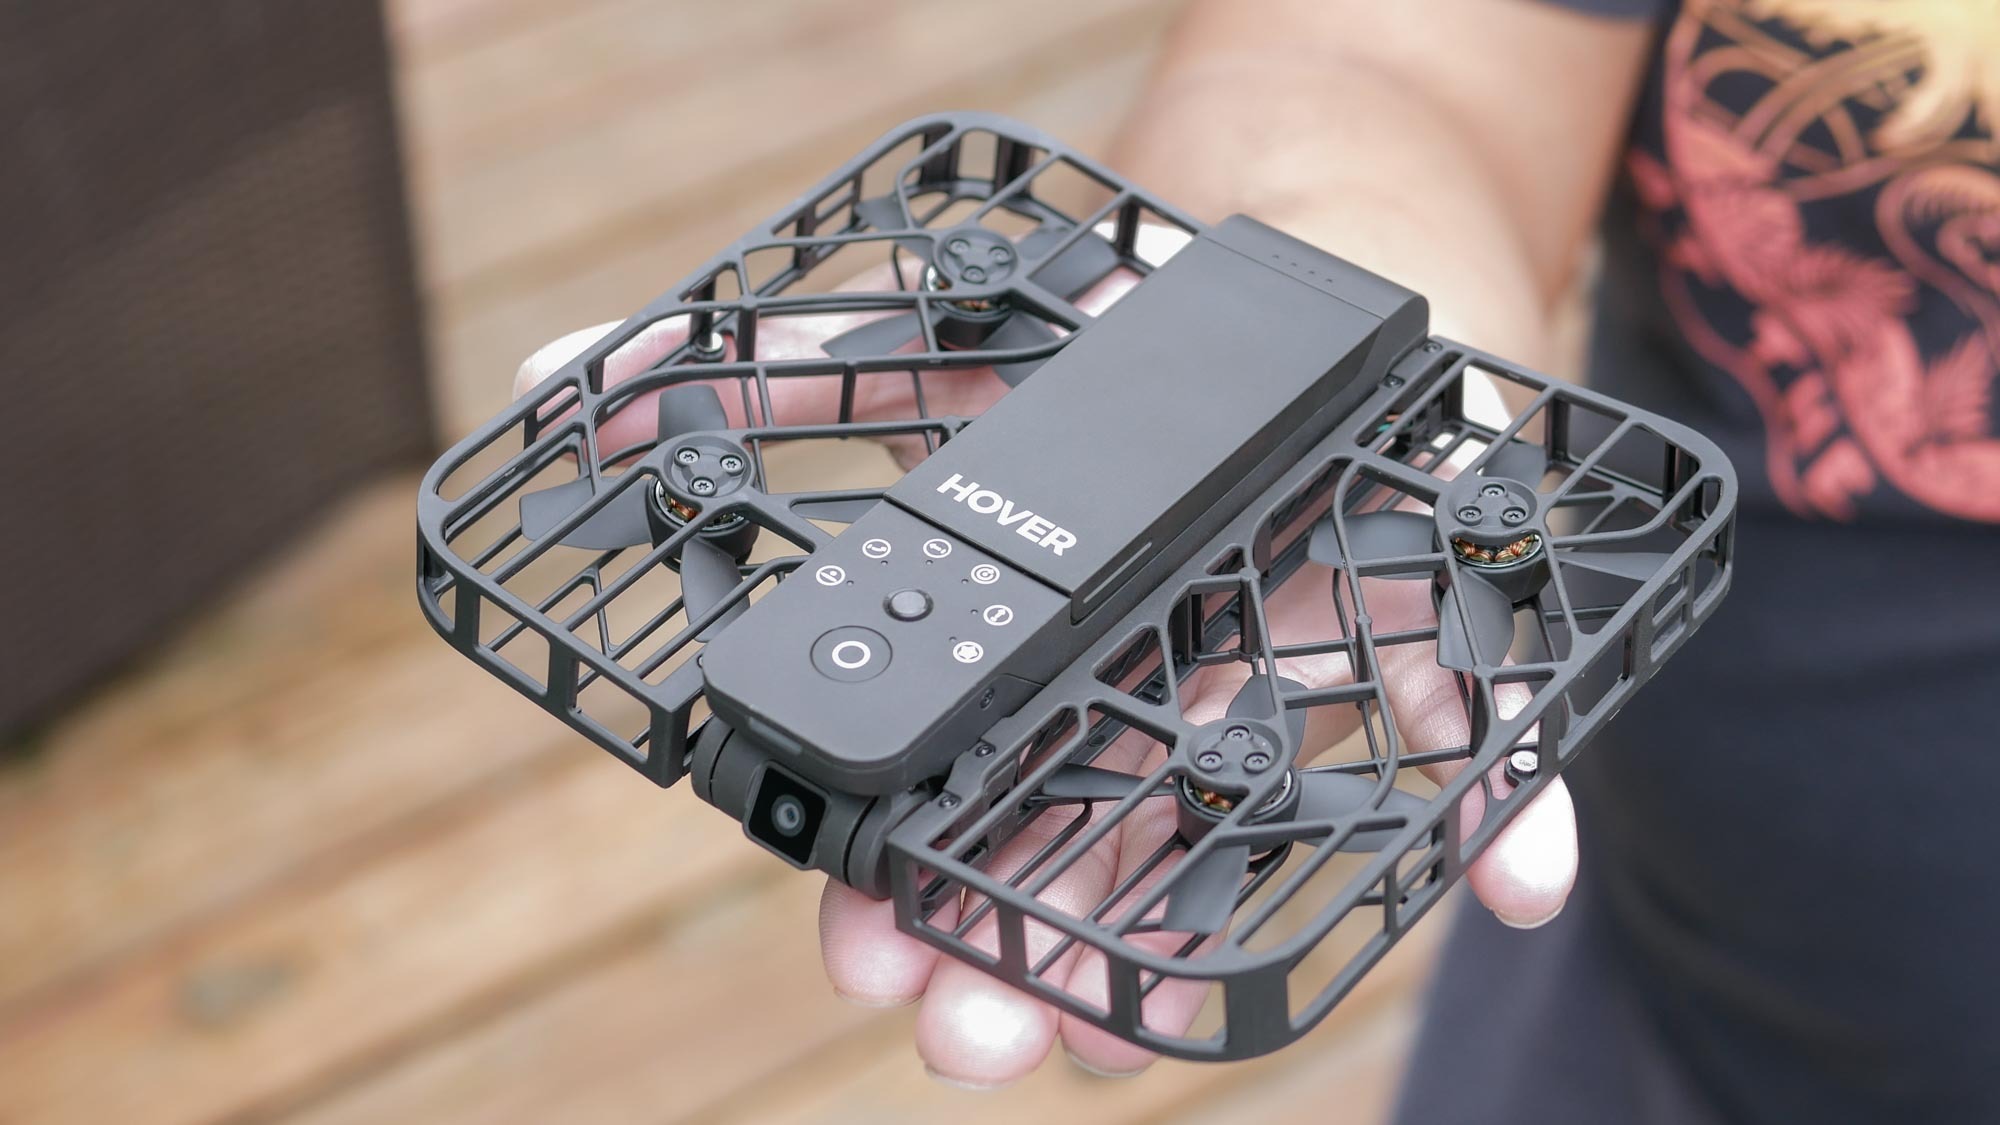 DJI Pocket 2 review: Better than the original - Android Authority